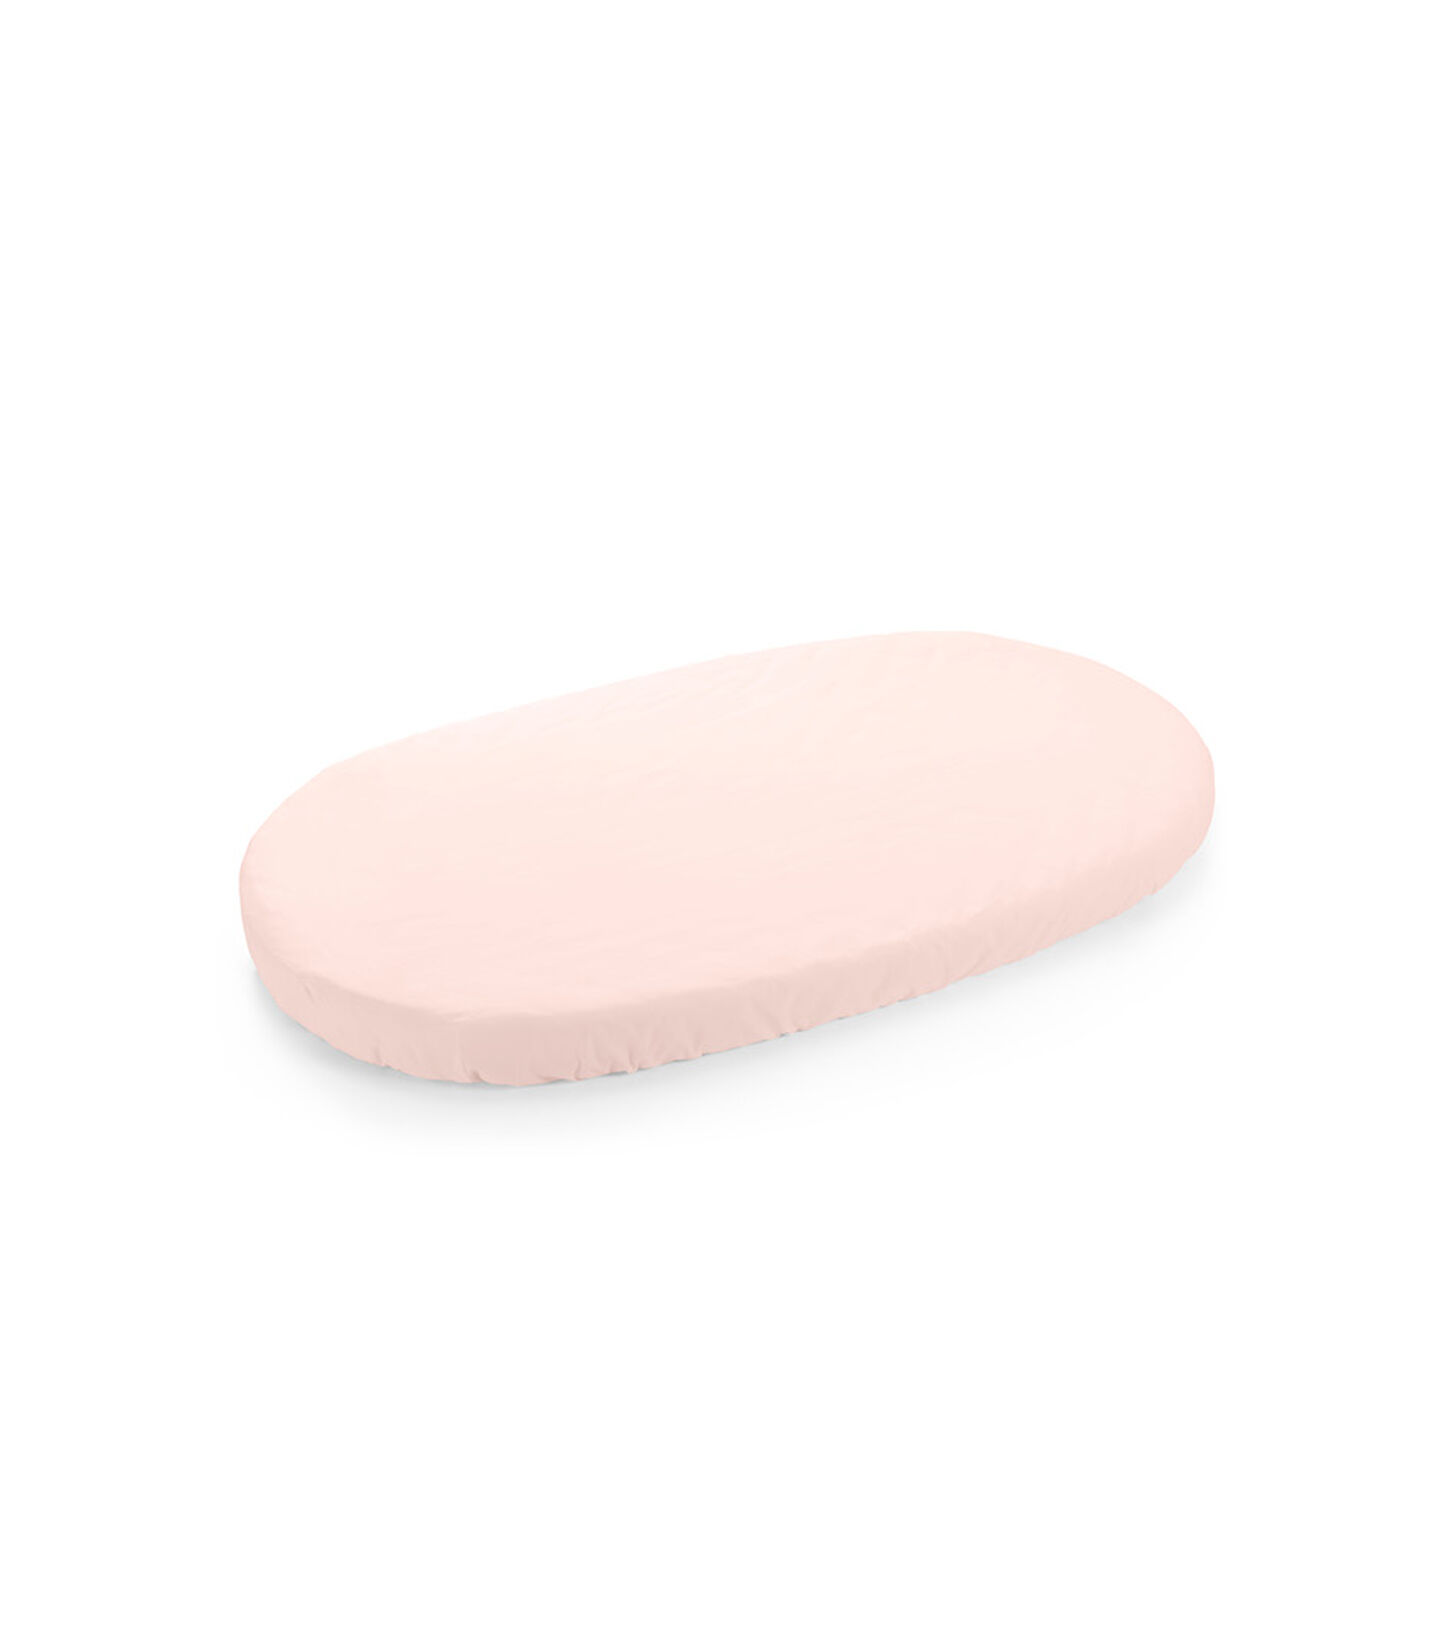 Stokke® Sleepi™ Fitted Sheet Pink, 桃粉色, mainview view 1